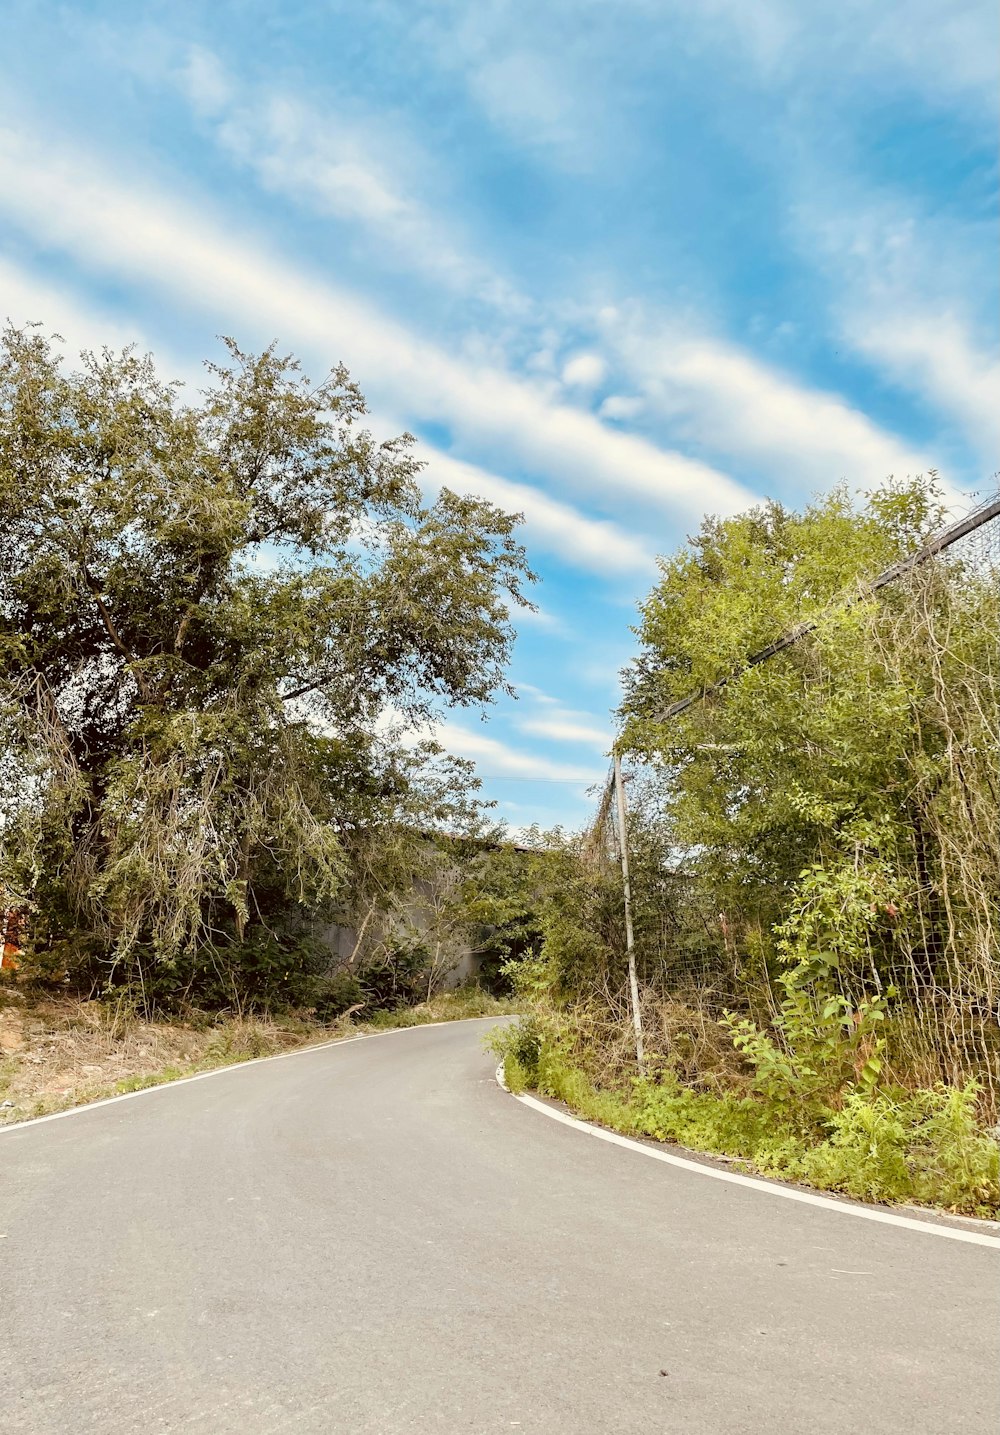 green trees beside gray concrete road under blue sky during daytime